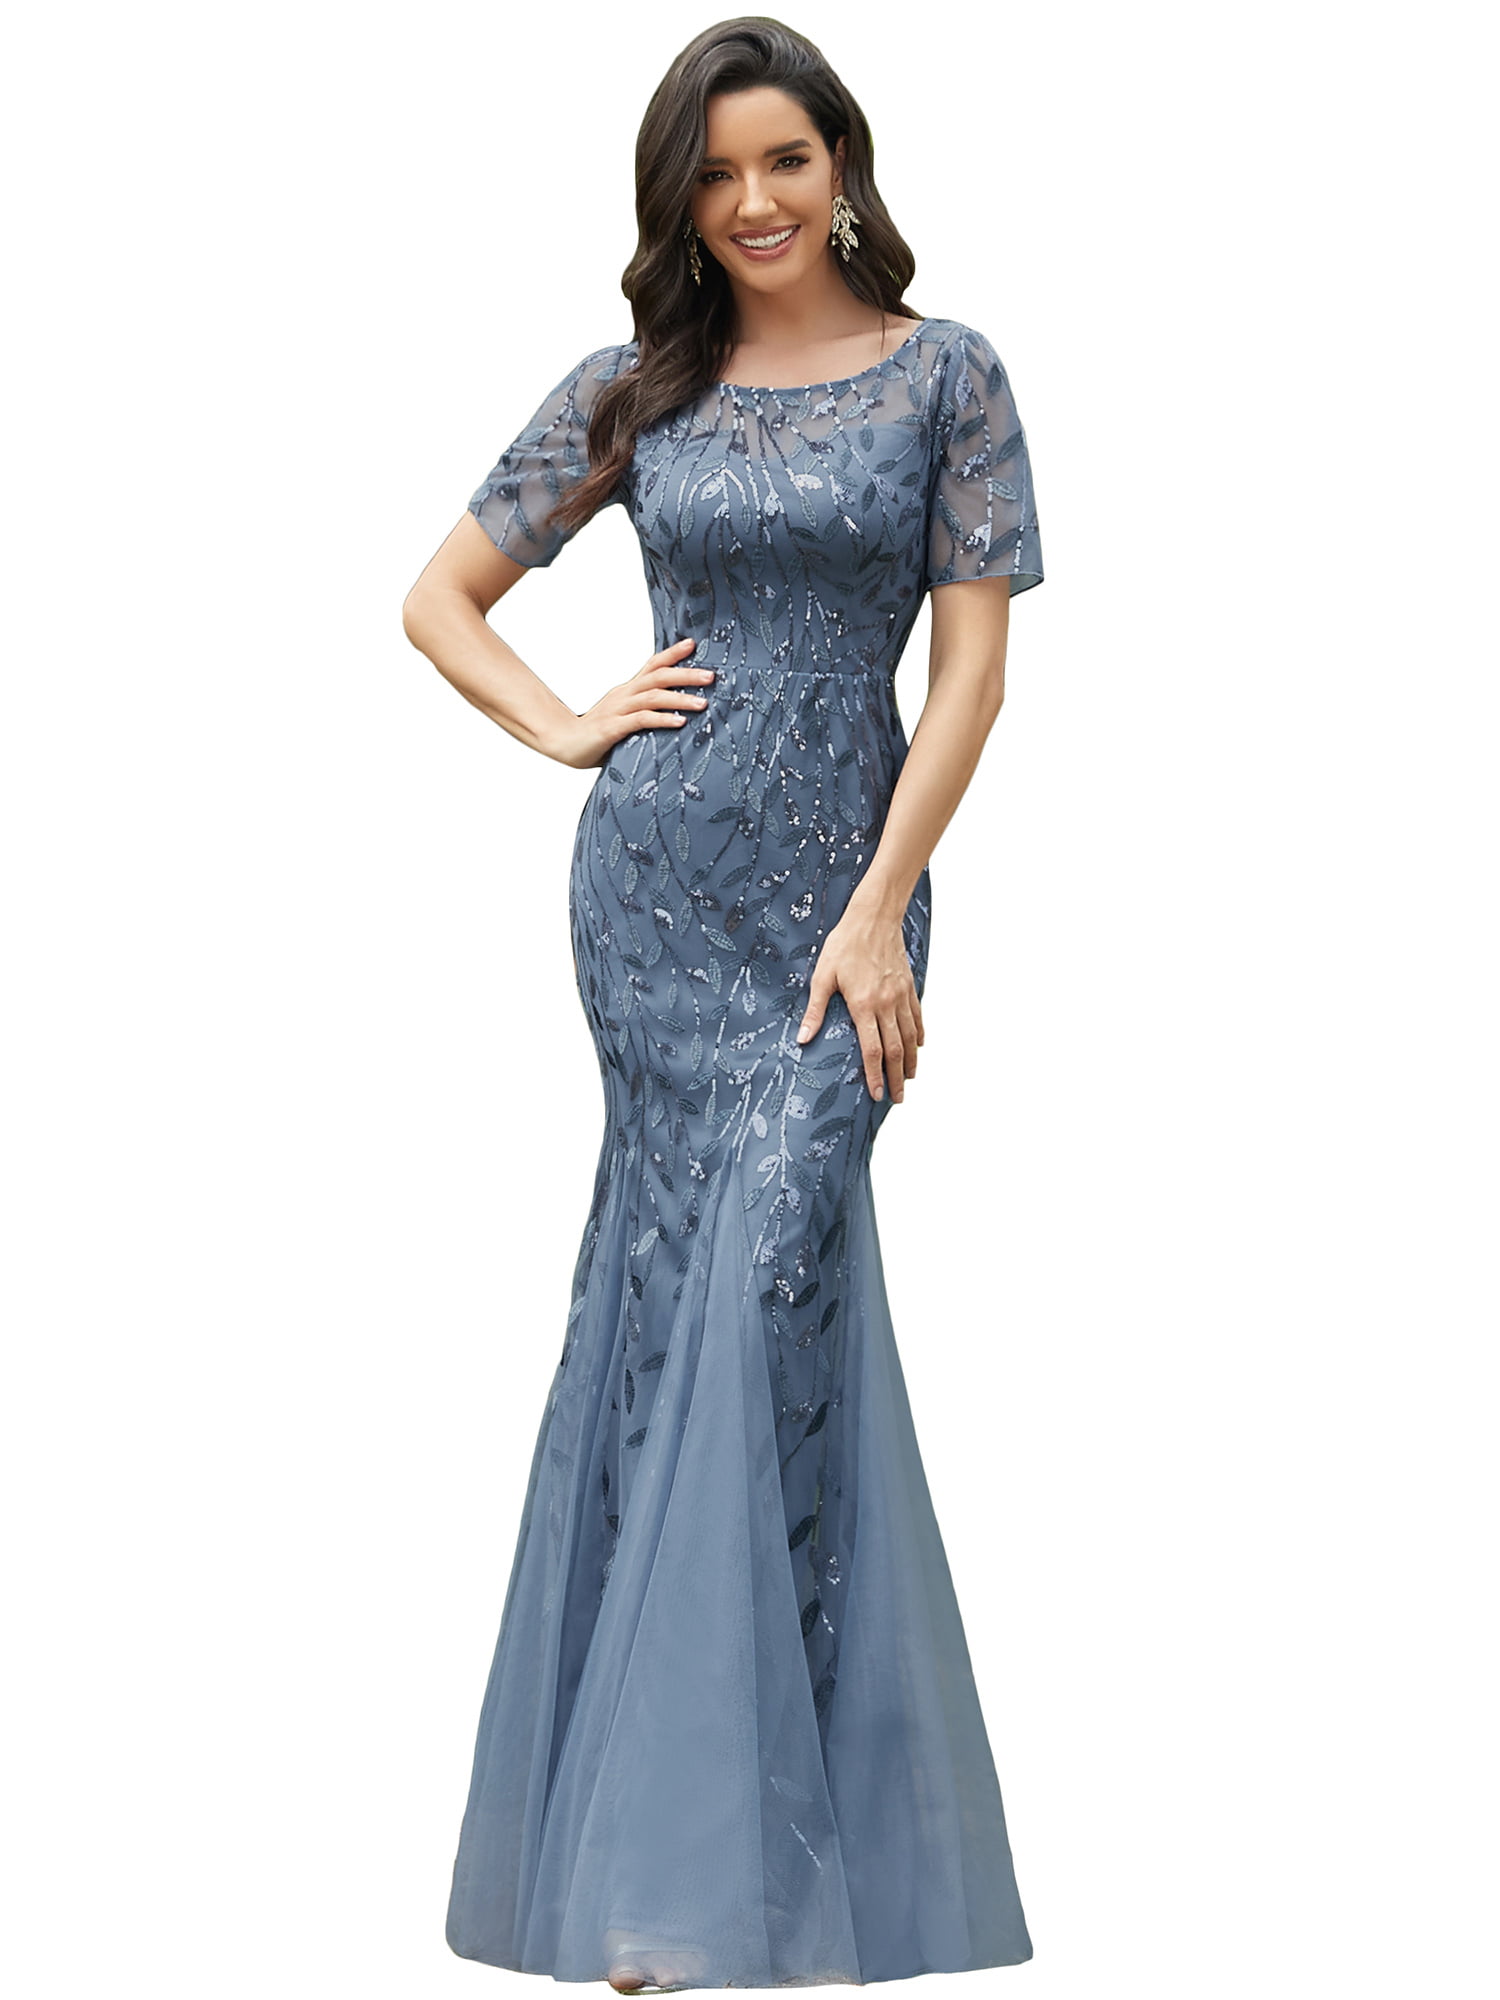 Ever-pretty Women Sequins Formal Prom Gowns Celebrity Evening Party Dress 07707 